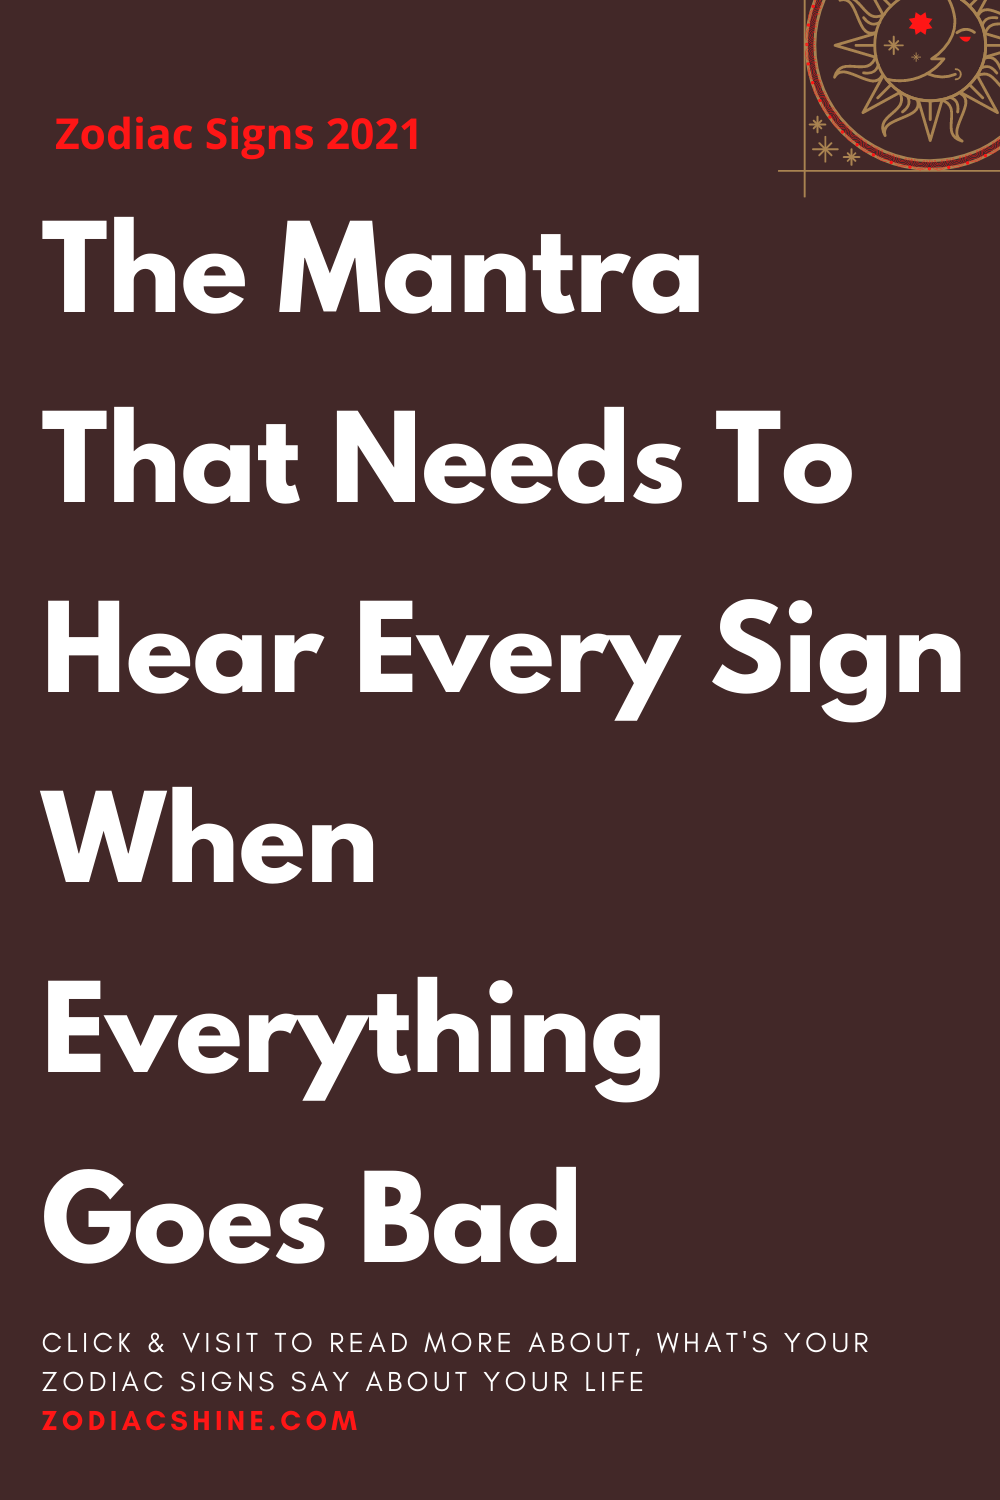 The Mantra That Needs To Hear Every Sign When Everything Goes Bad